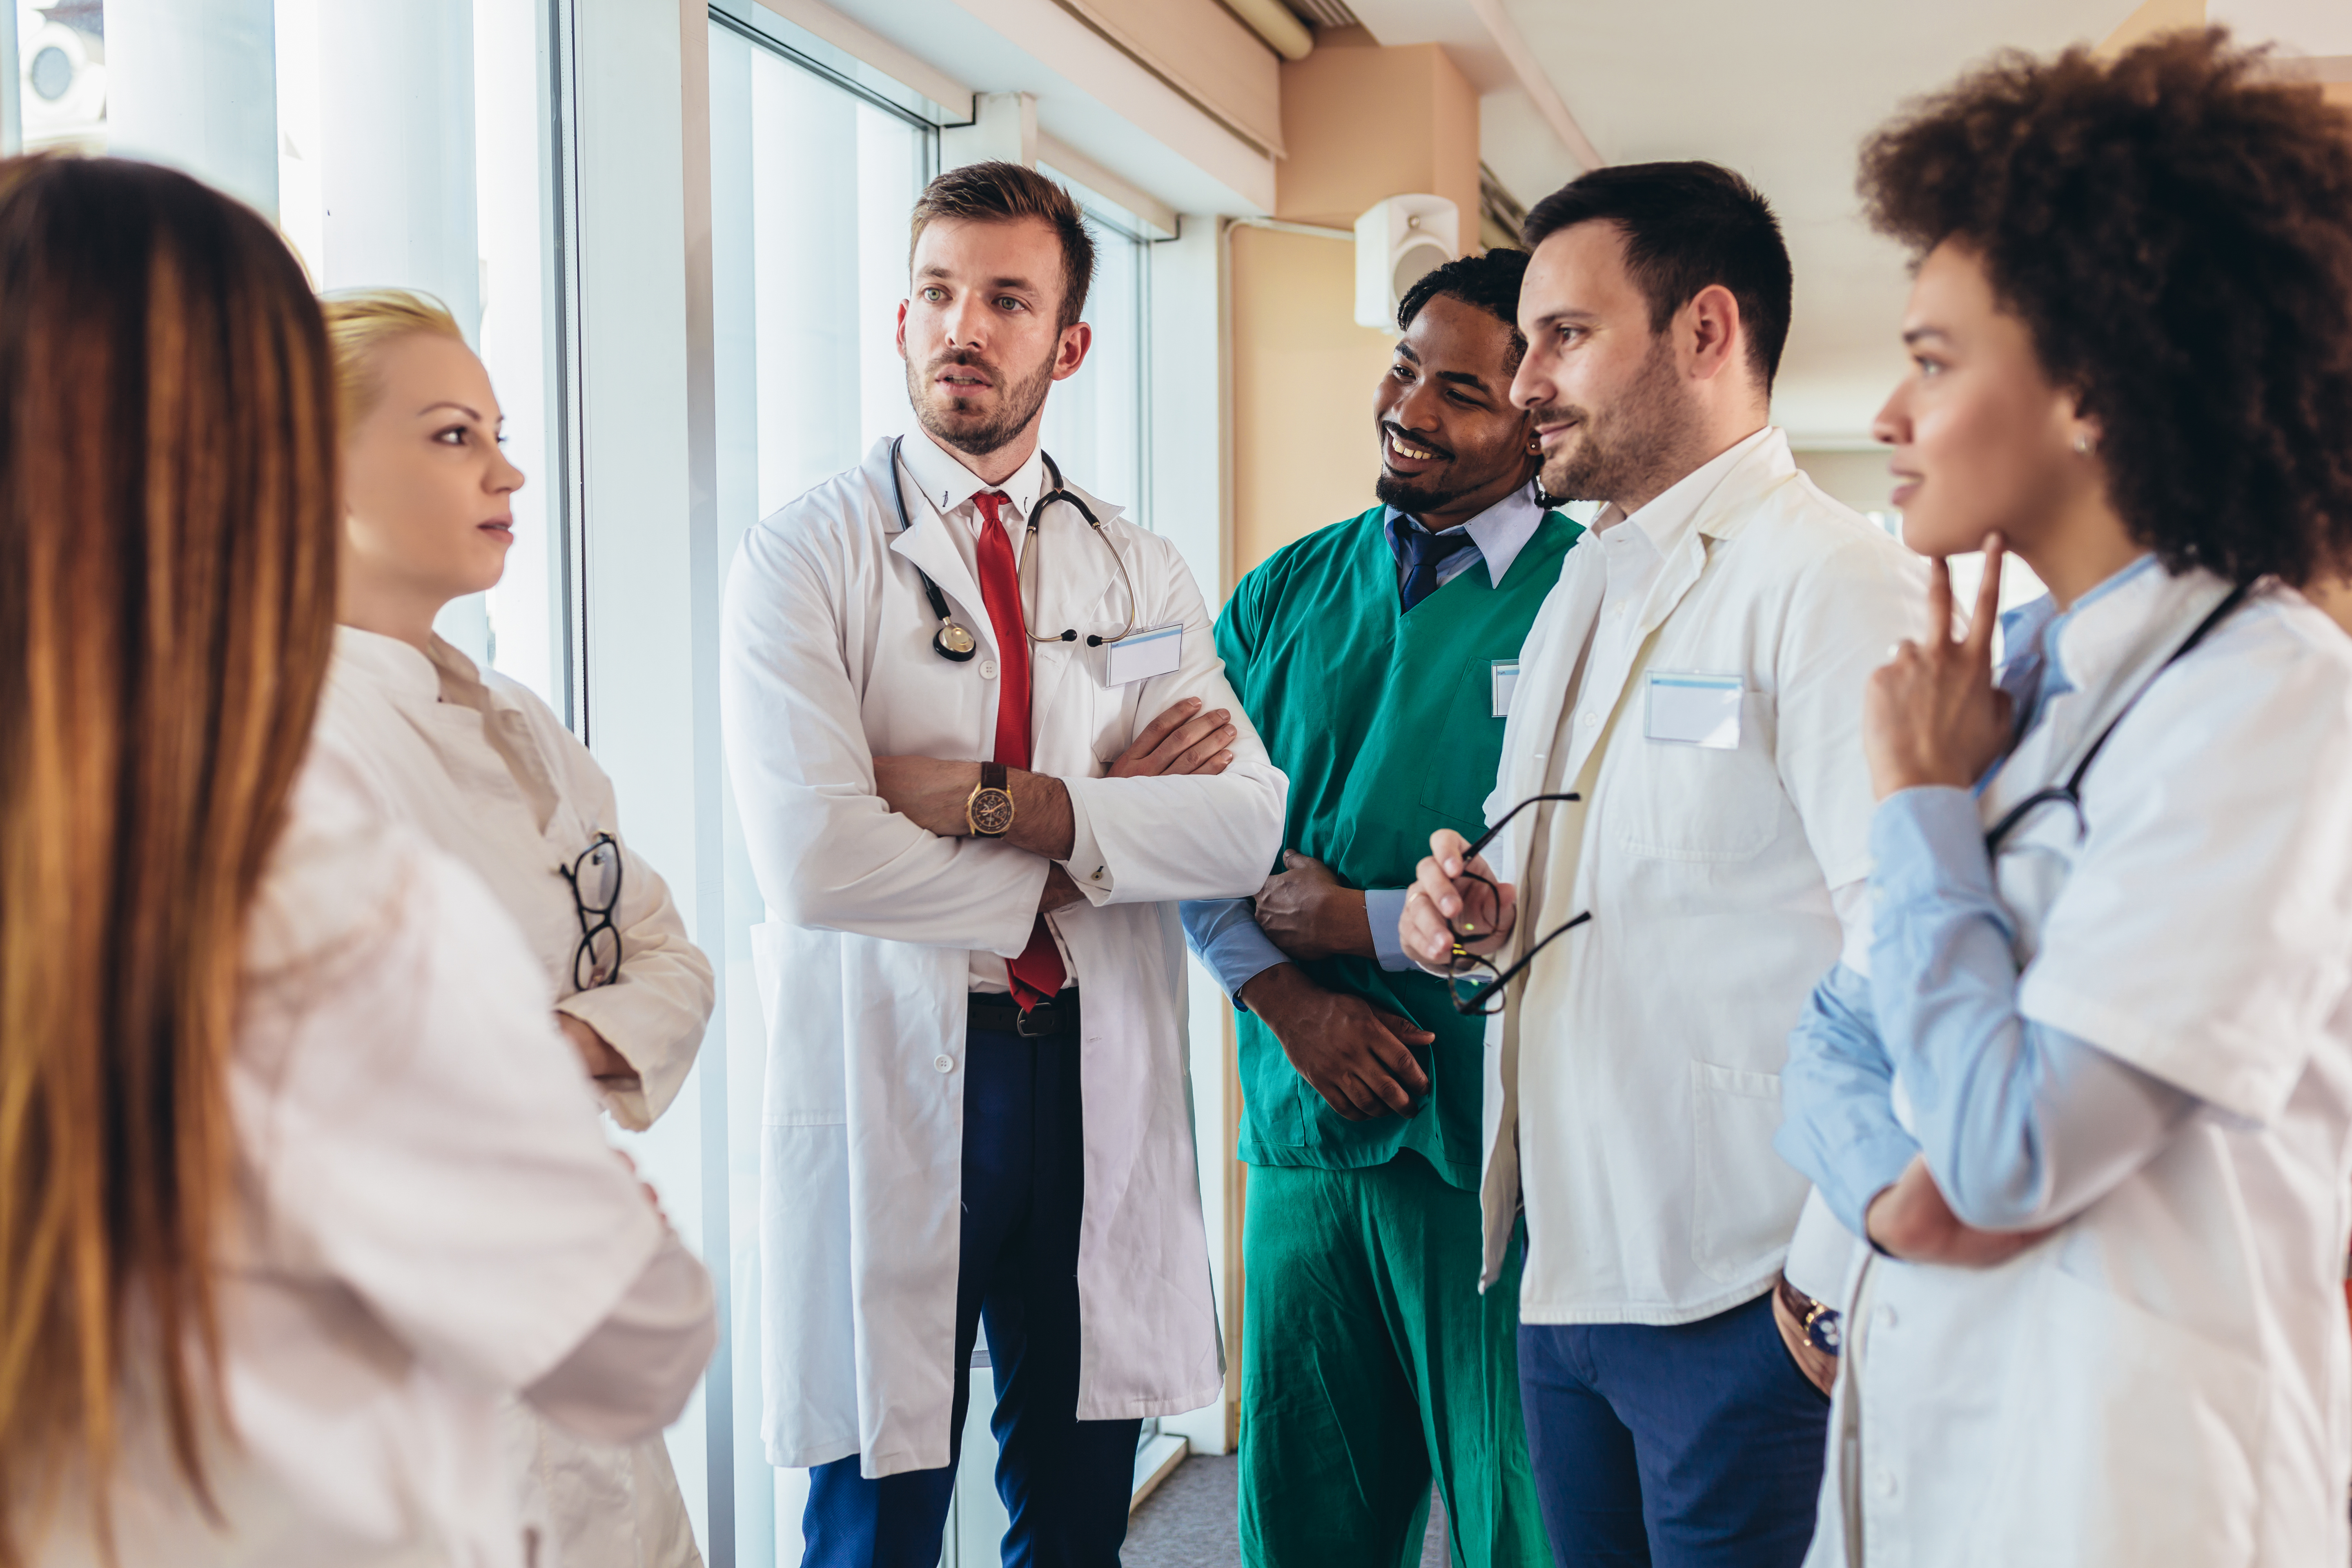 Image of medical professionals standing in a semi-circle